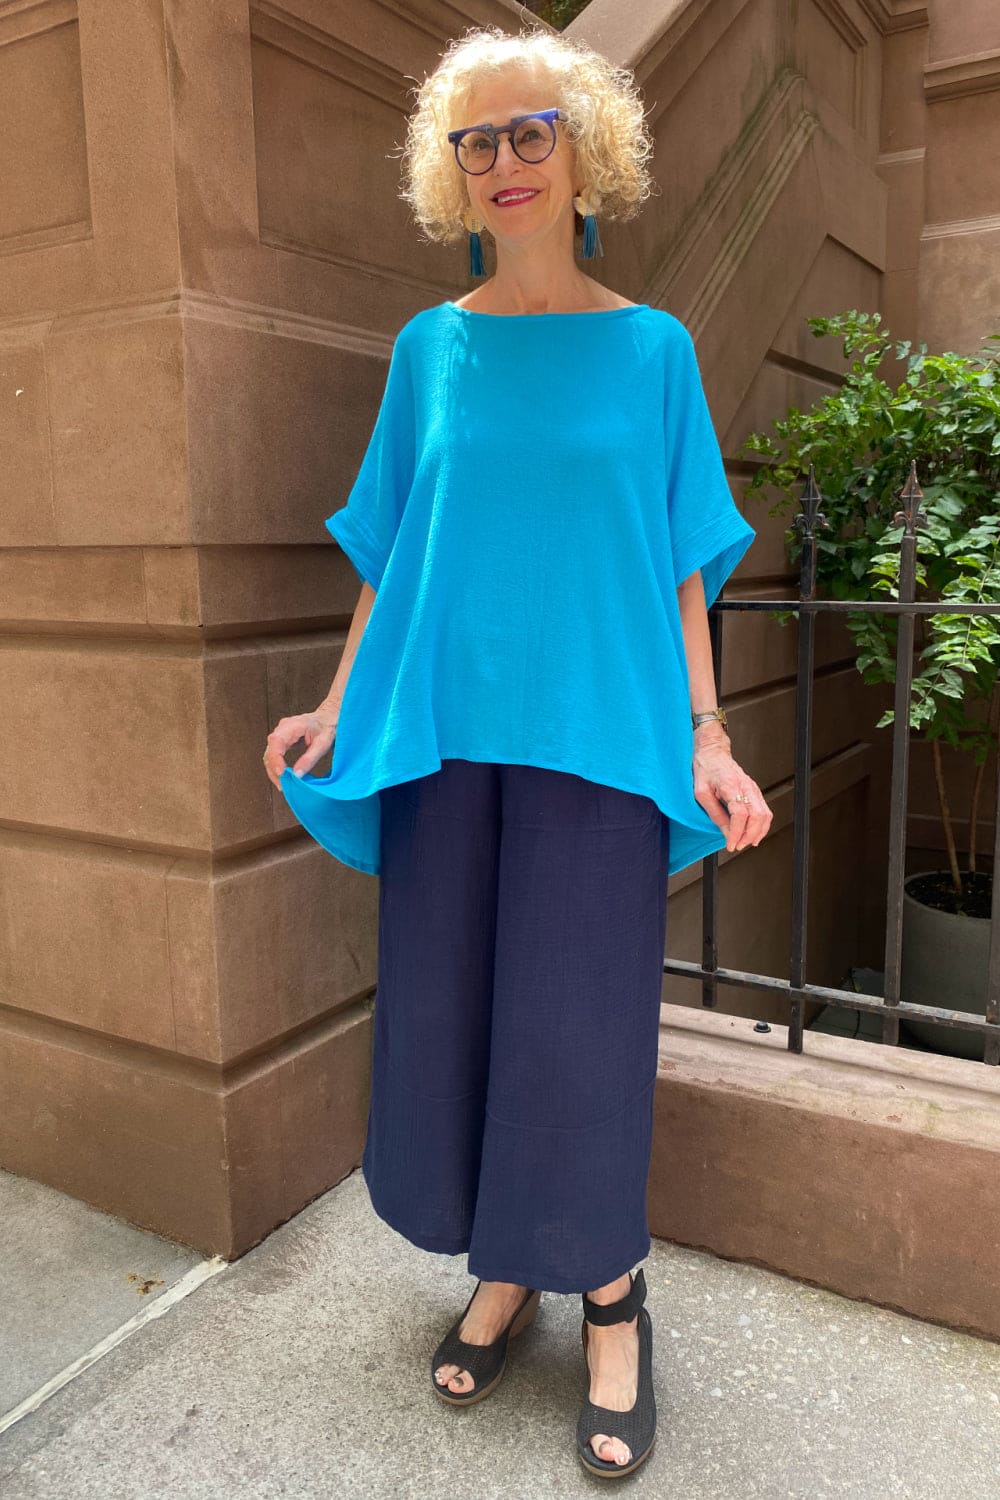 Loose fit cotton navy pants worn with a bright turquoise elbow length sleeved tee.